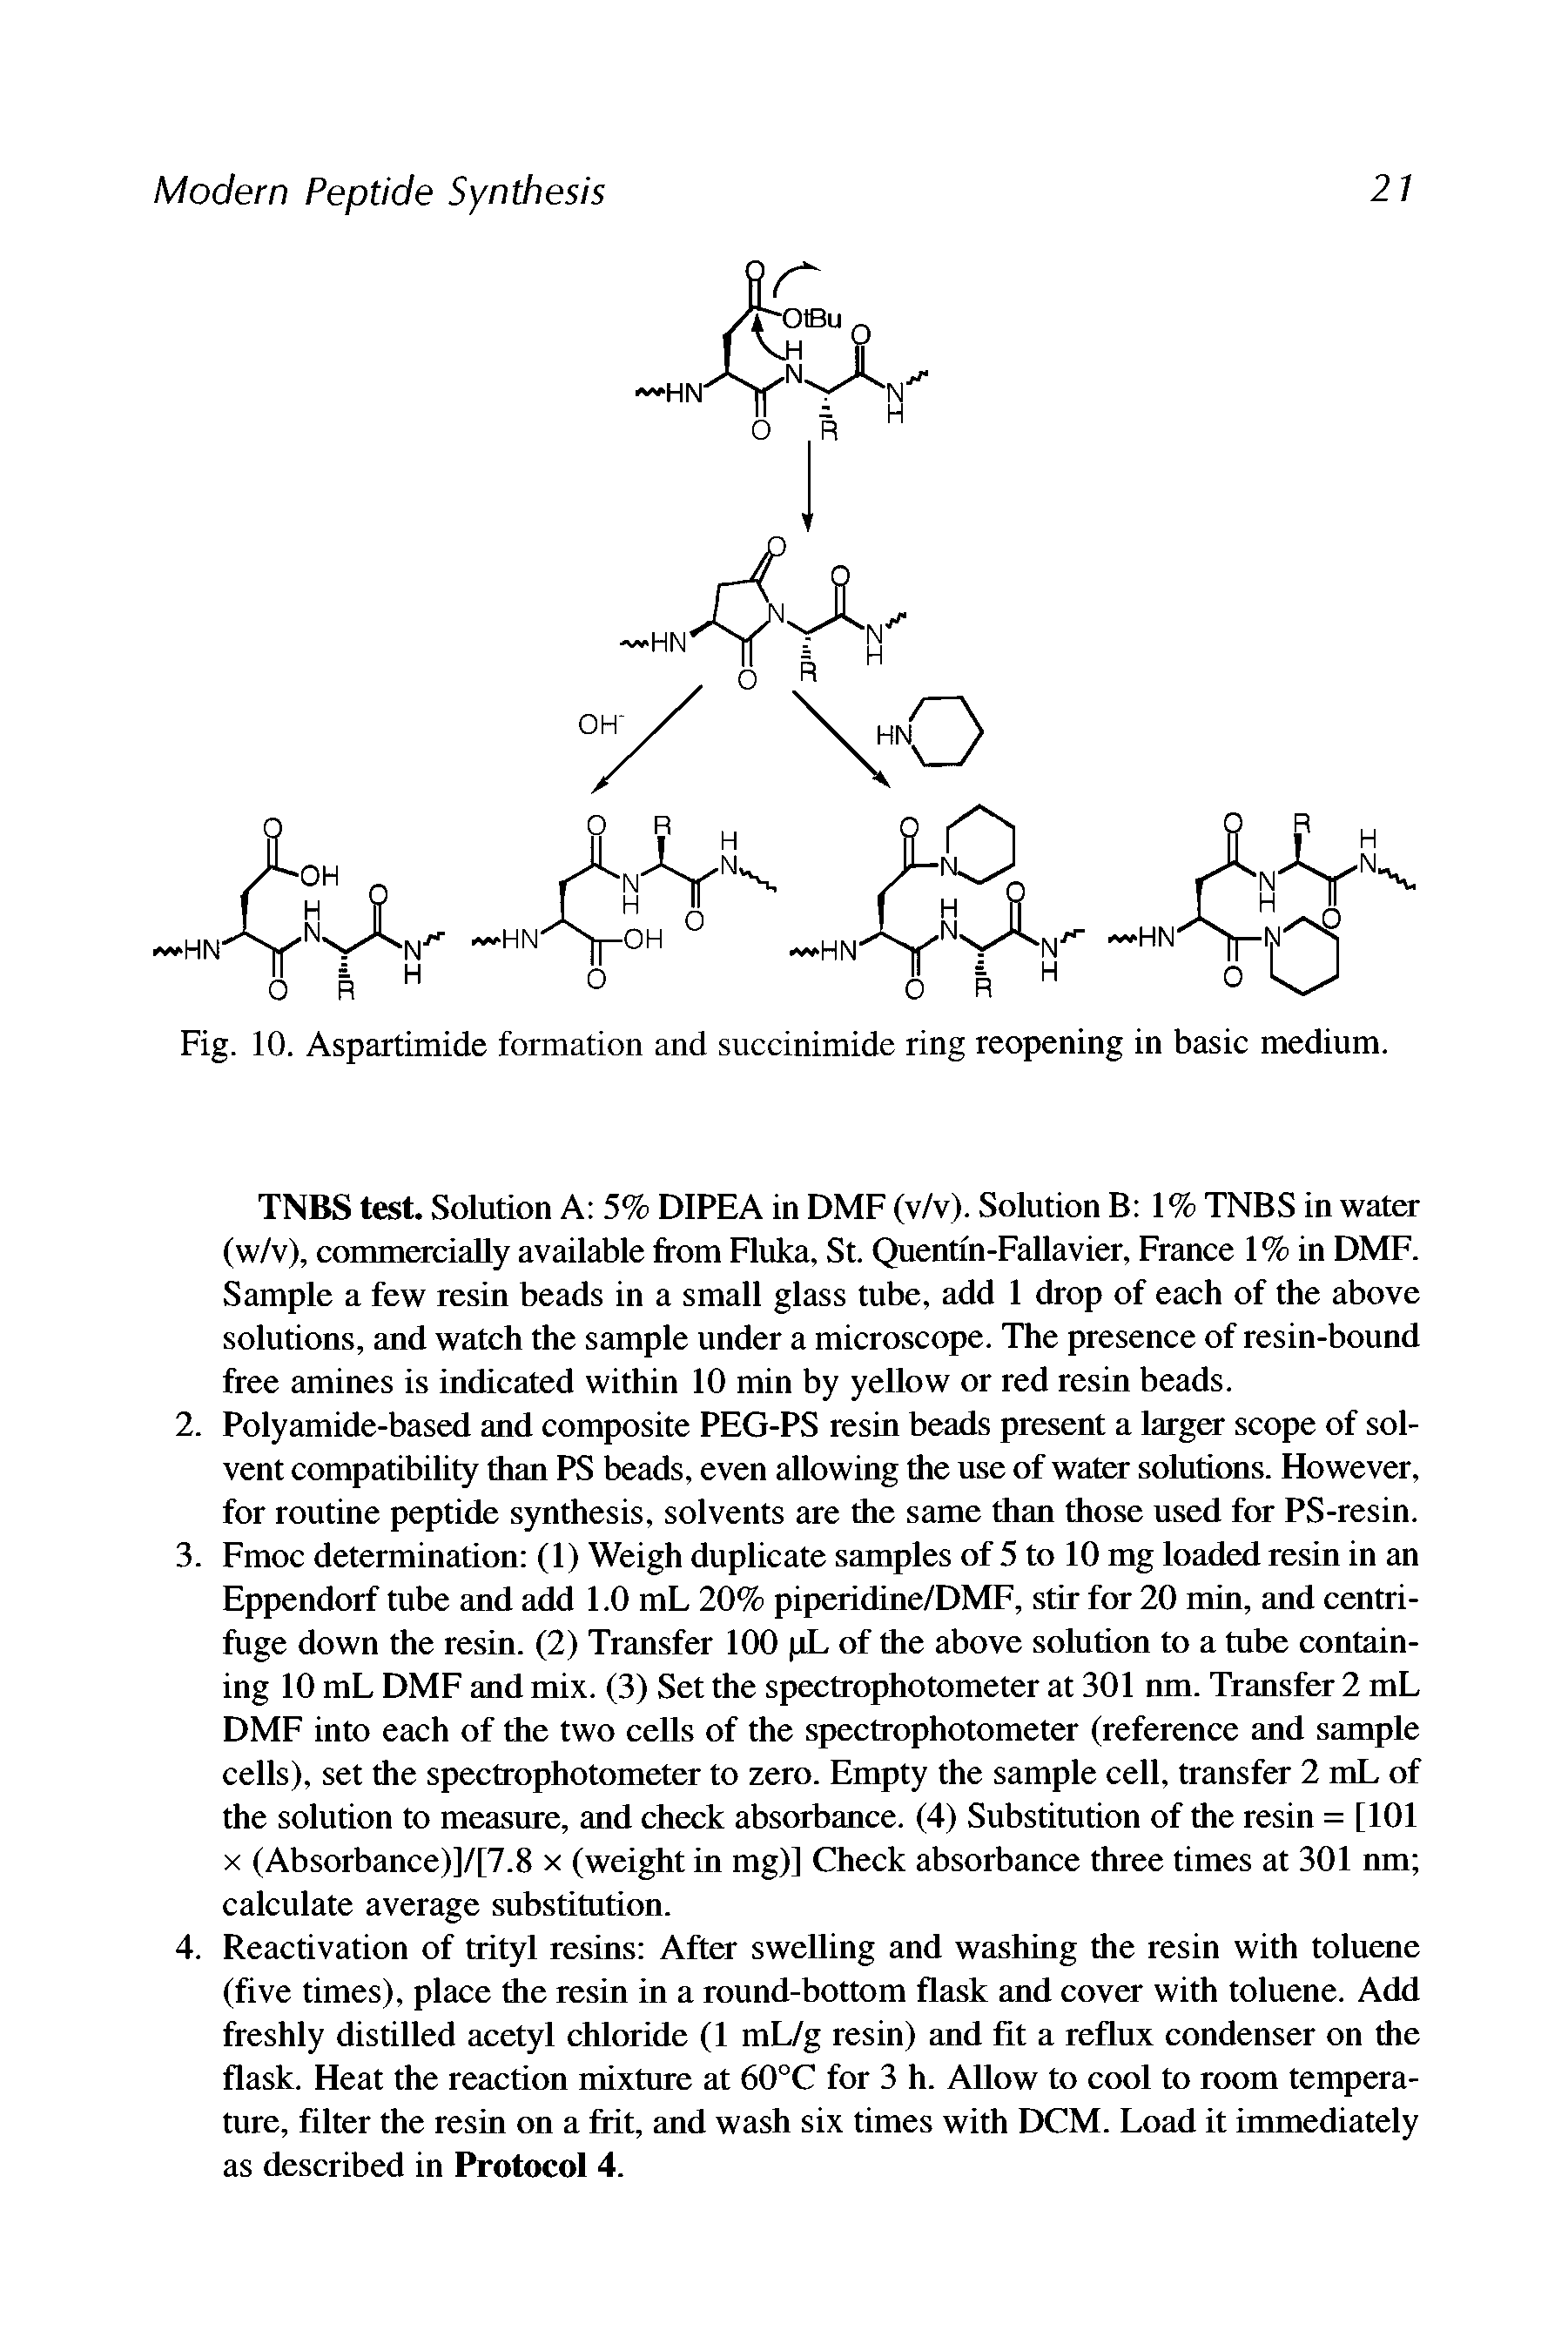 Fig. 10. Aspartimide formation and succinimide ring reopening in basic medium.